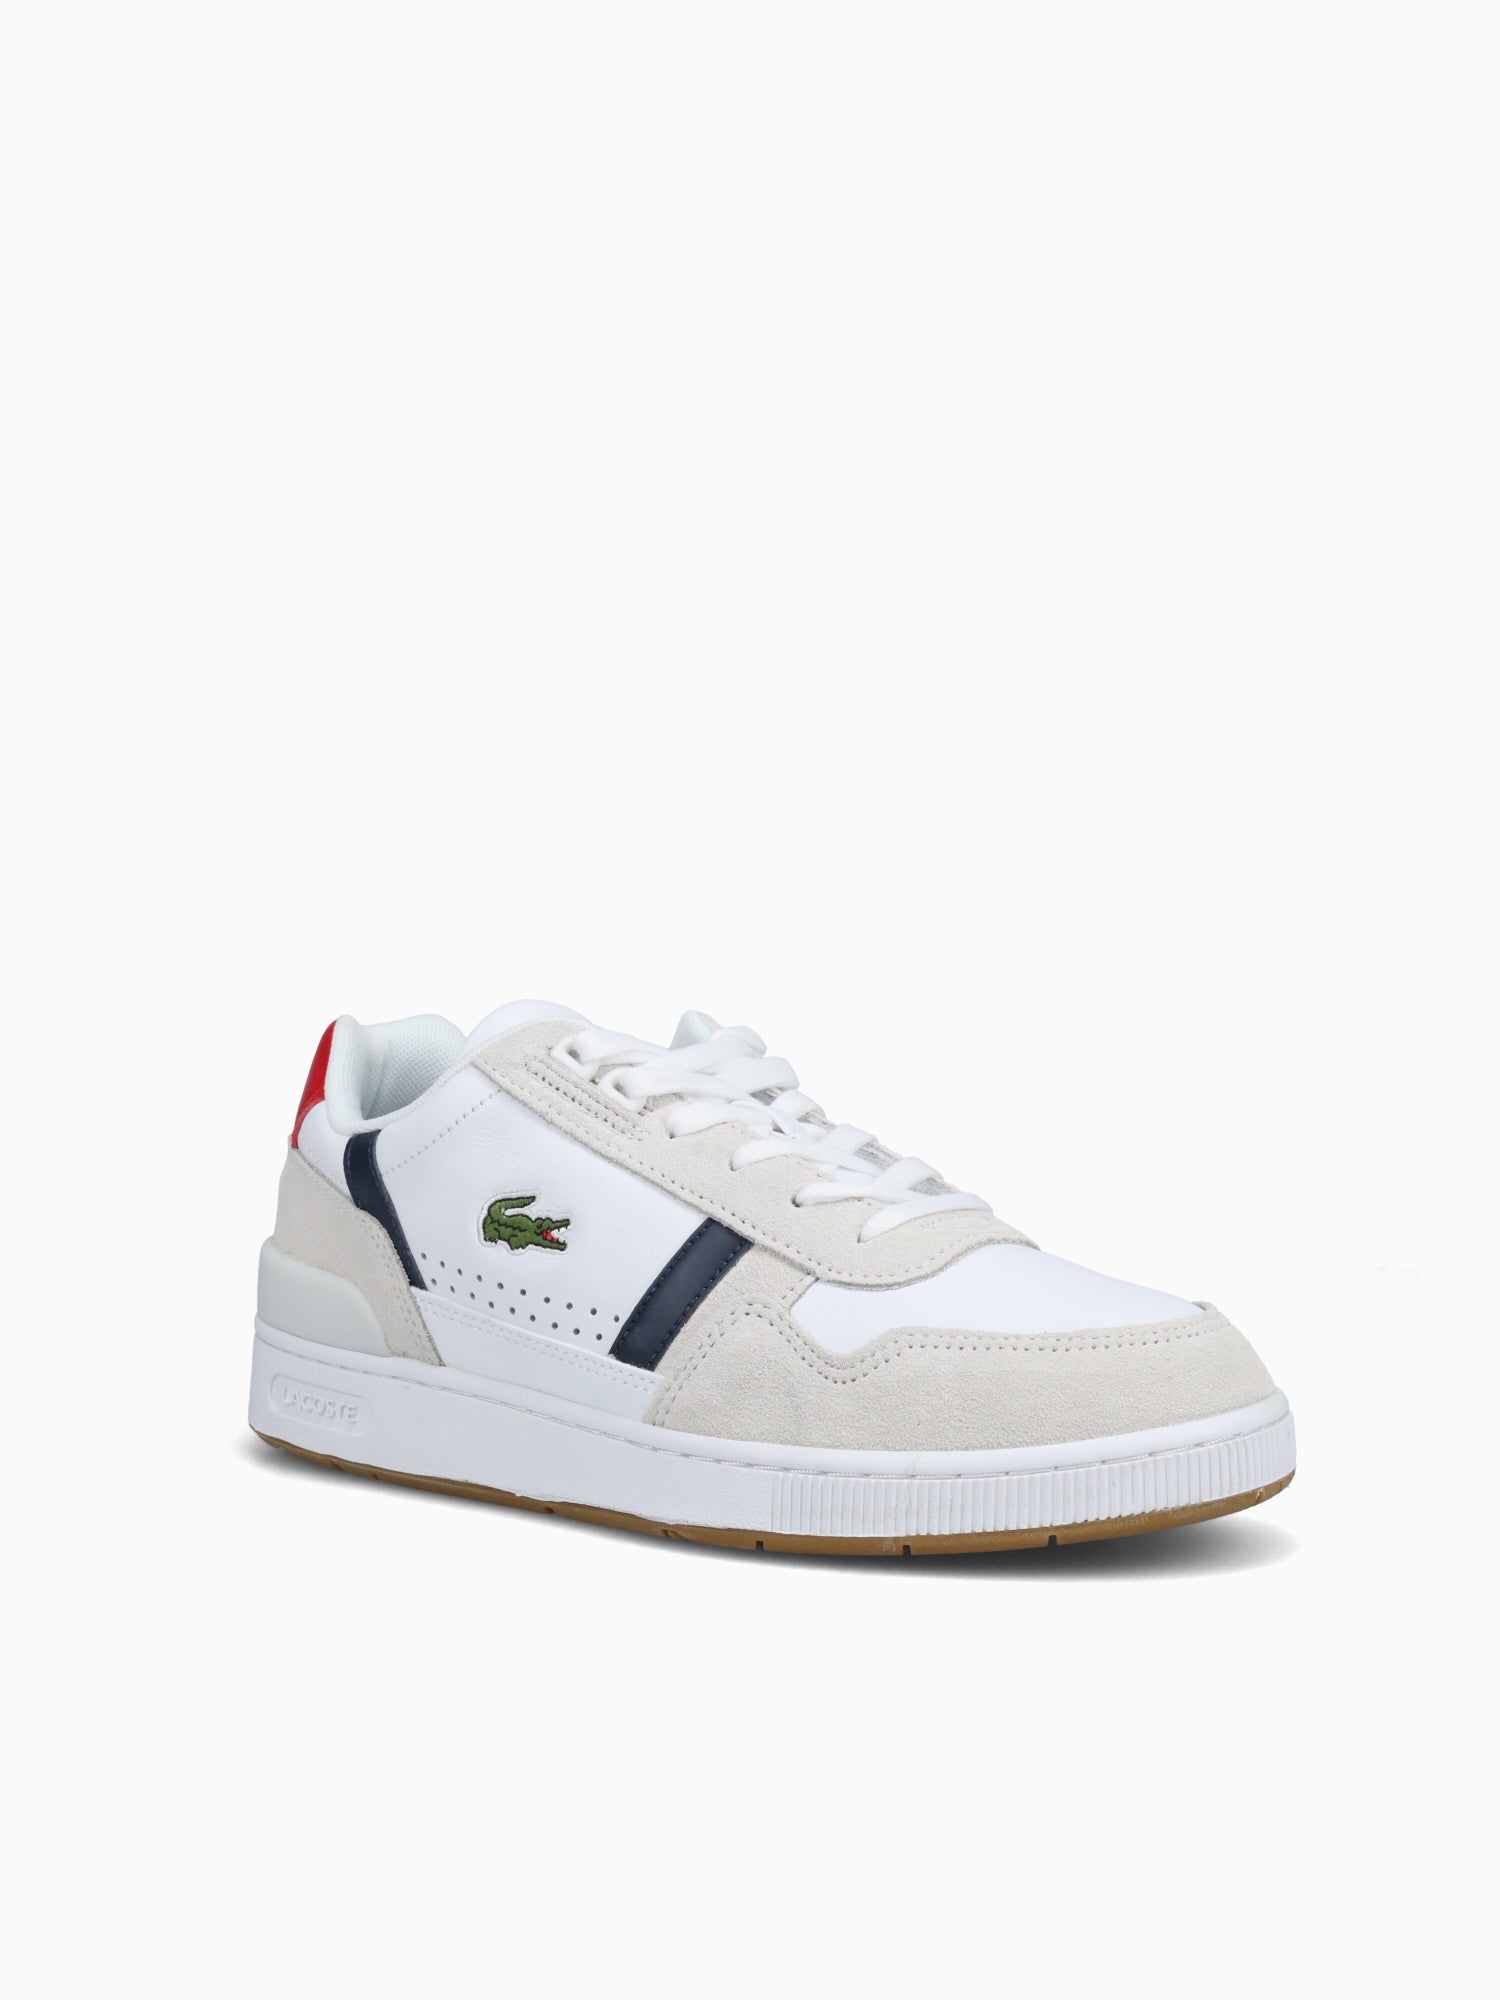 Tclip White Navy Red leather White / 7 / M